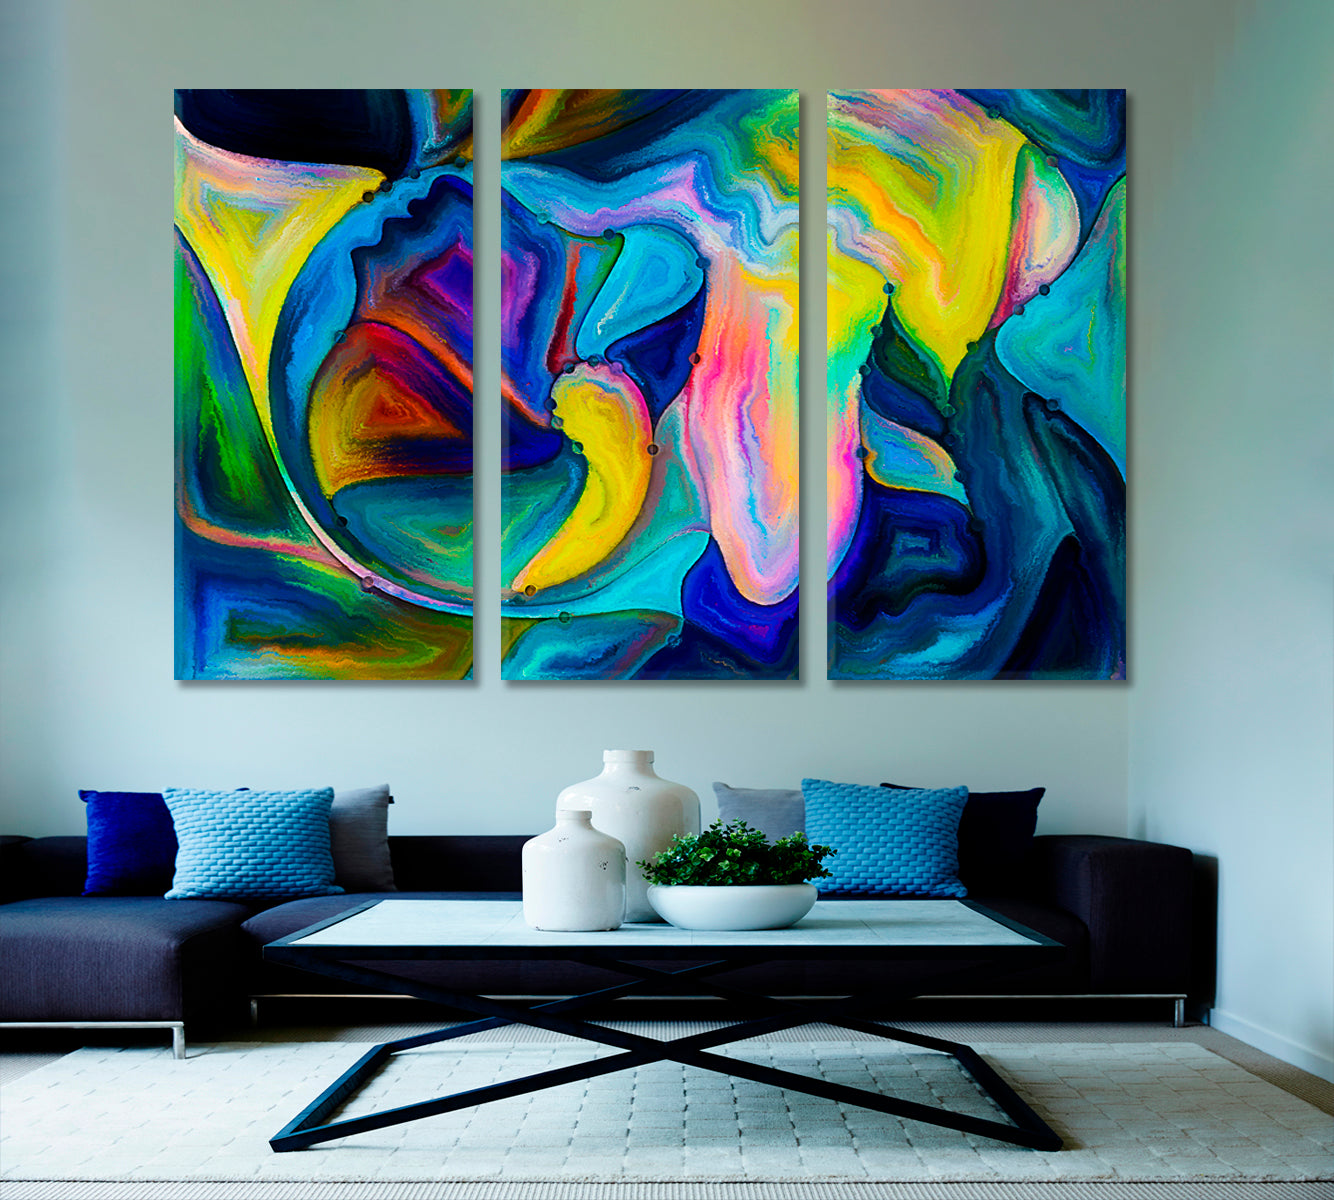 Angels Choice, Vivid Graceful Lines and Shapes Abstract Art Print Artesty 3 panels 36" x 24" 